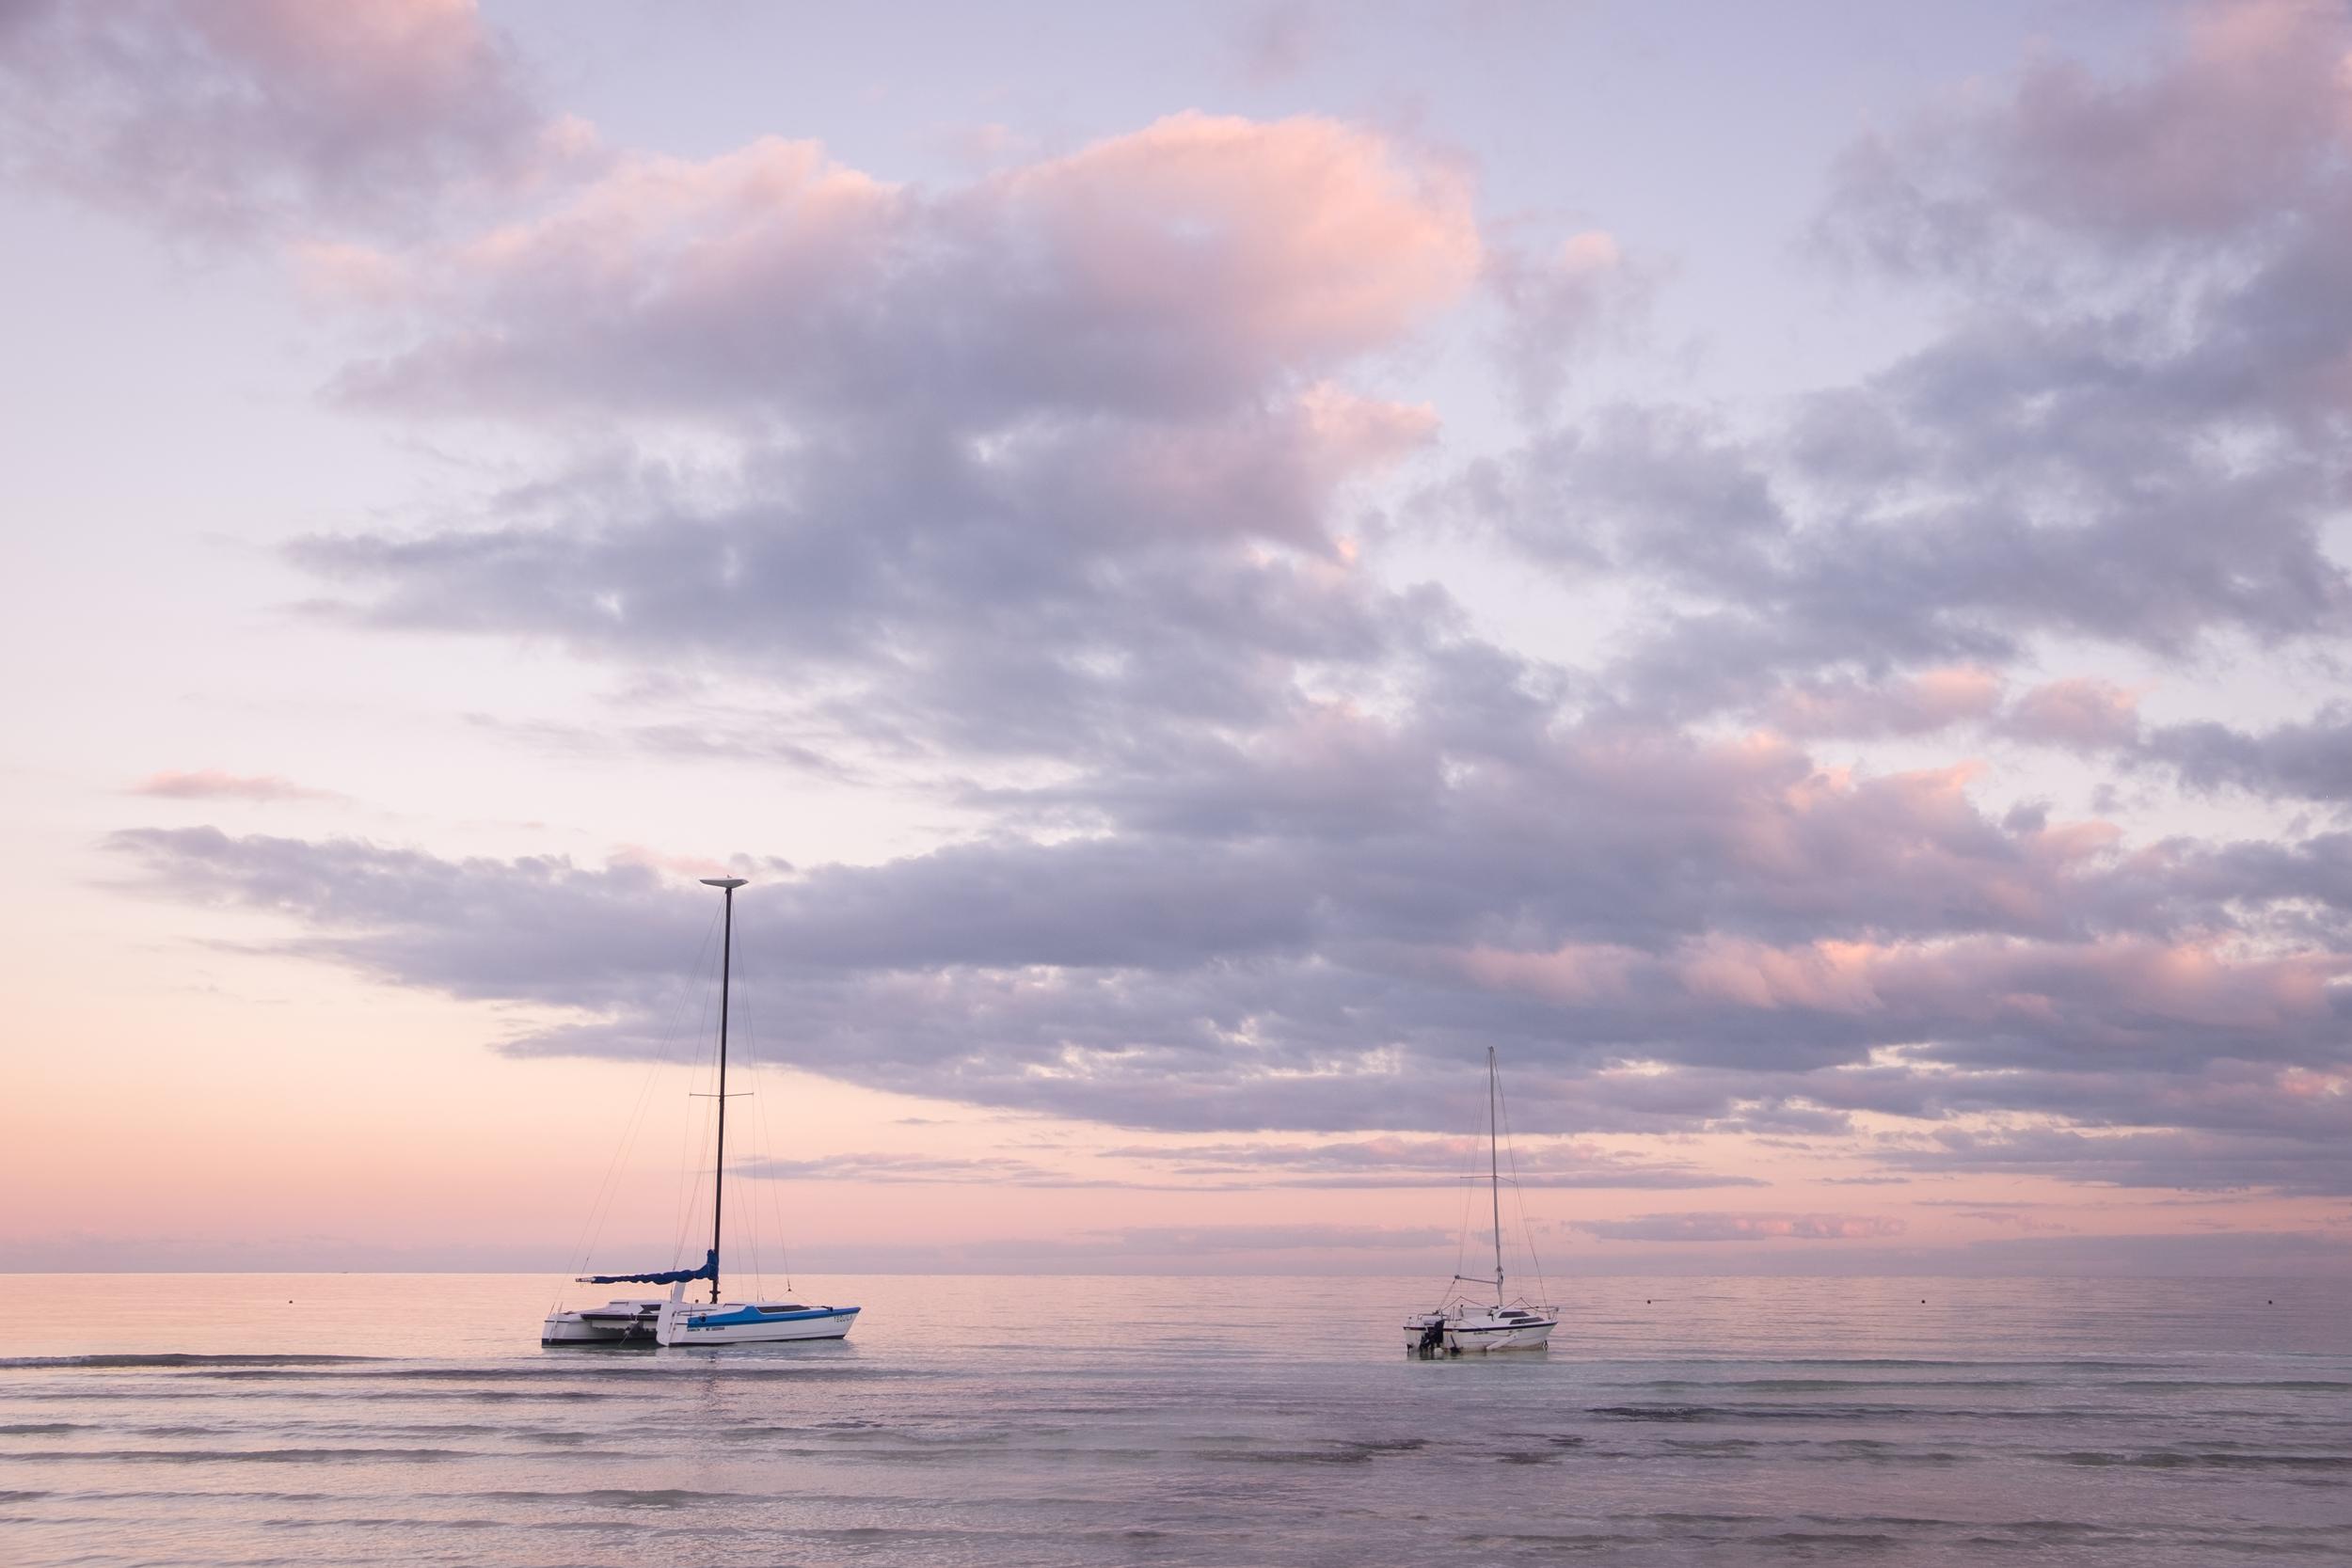 Two sailboats in the water with pink skies and clouds.